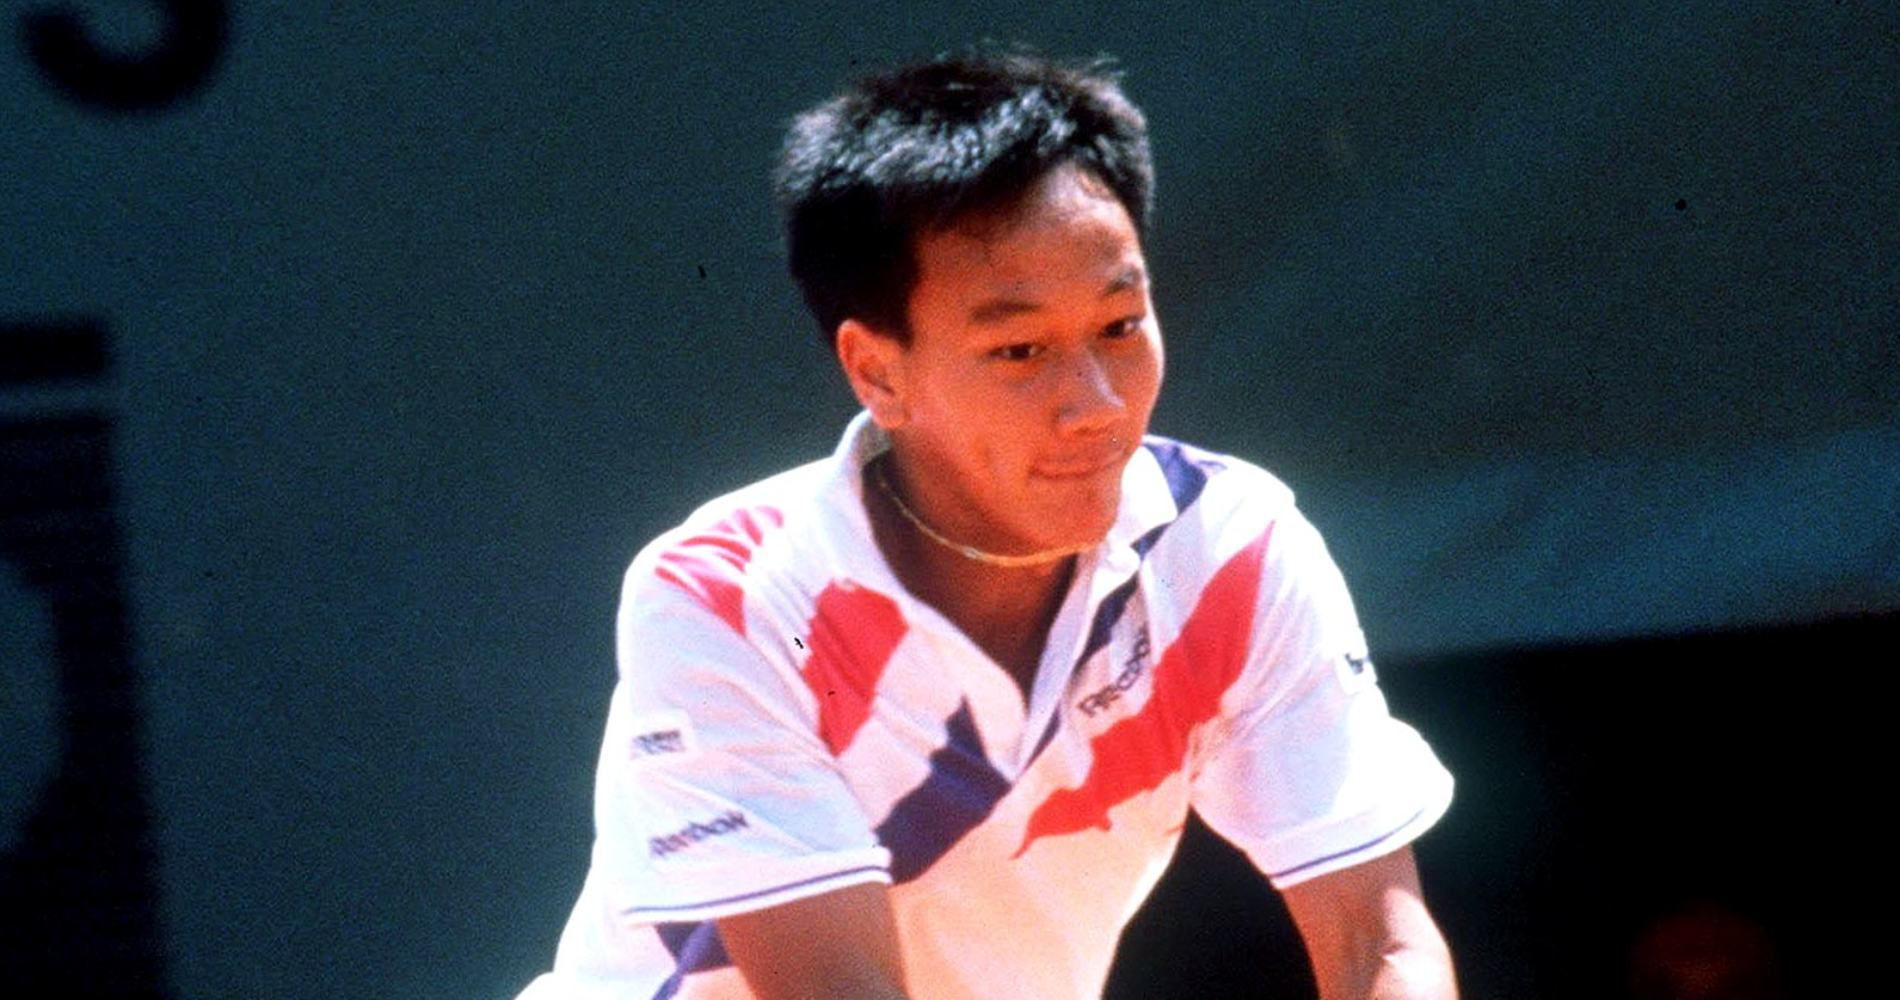 Michael Chang, 1989 French Open (Roland-Garros)